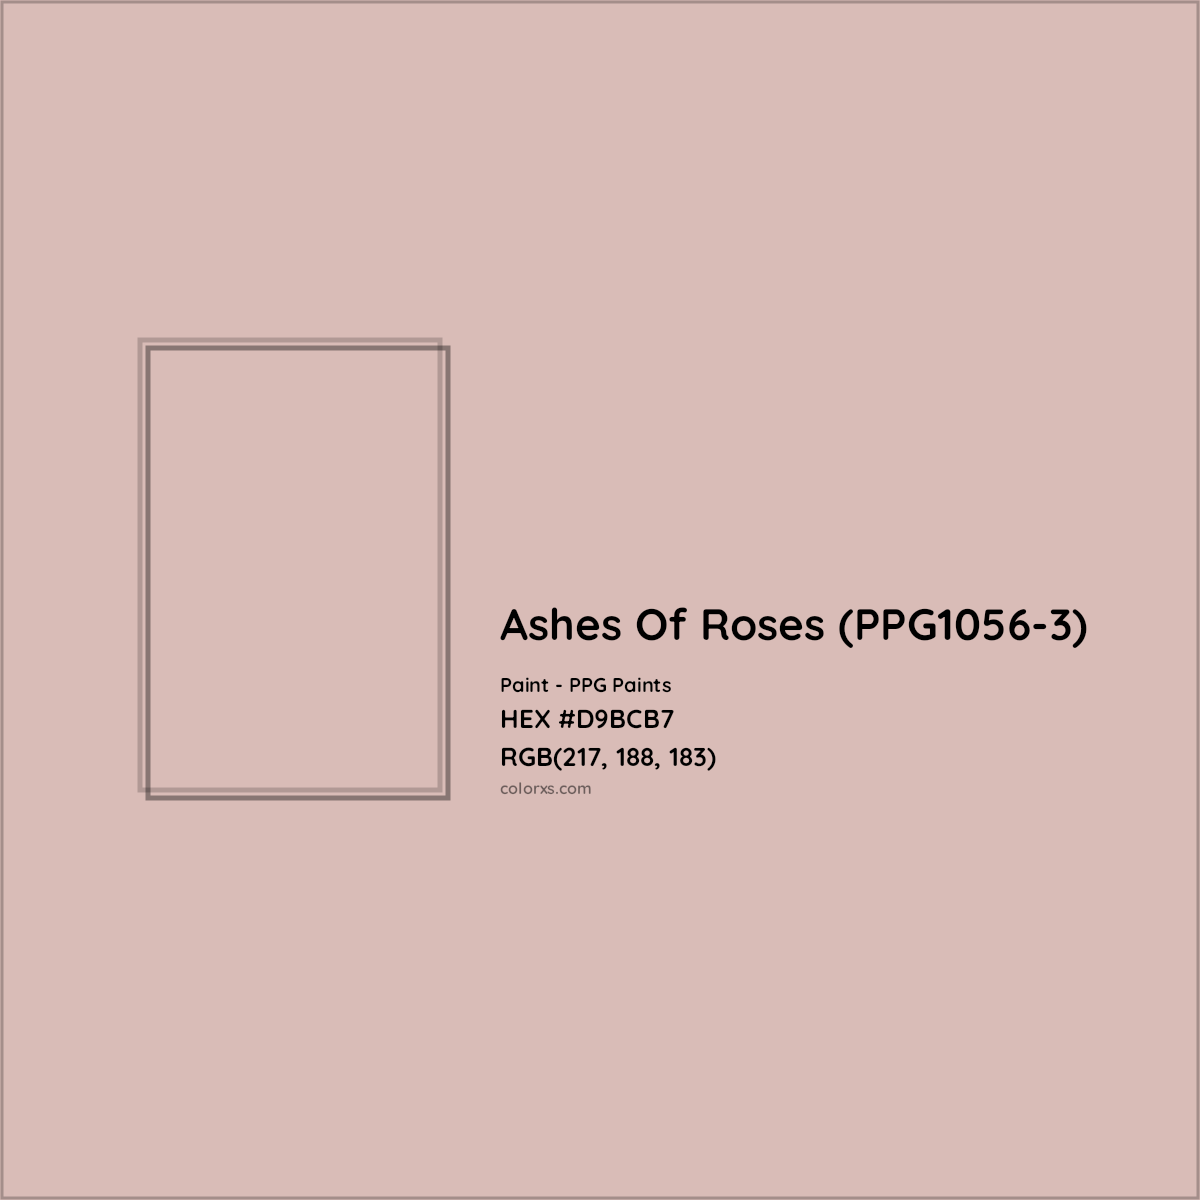 HEX #D9BCB7 Ashes Of Roses (PPG1056-3) Paint PPG Paints - Color Code